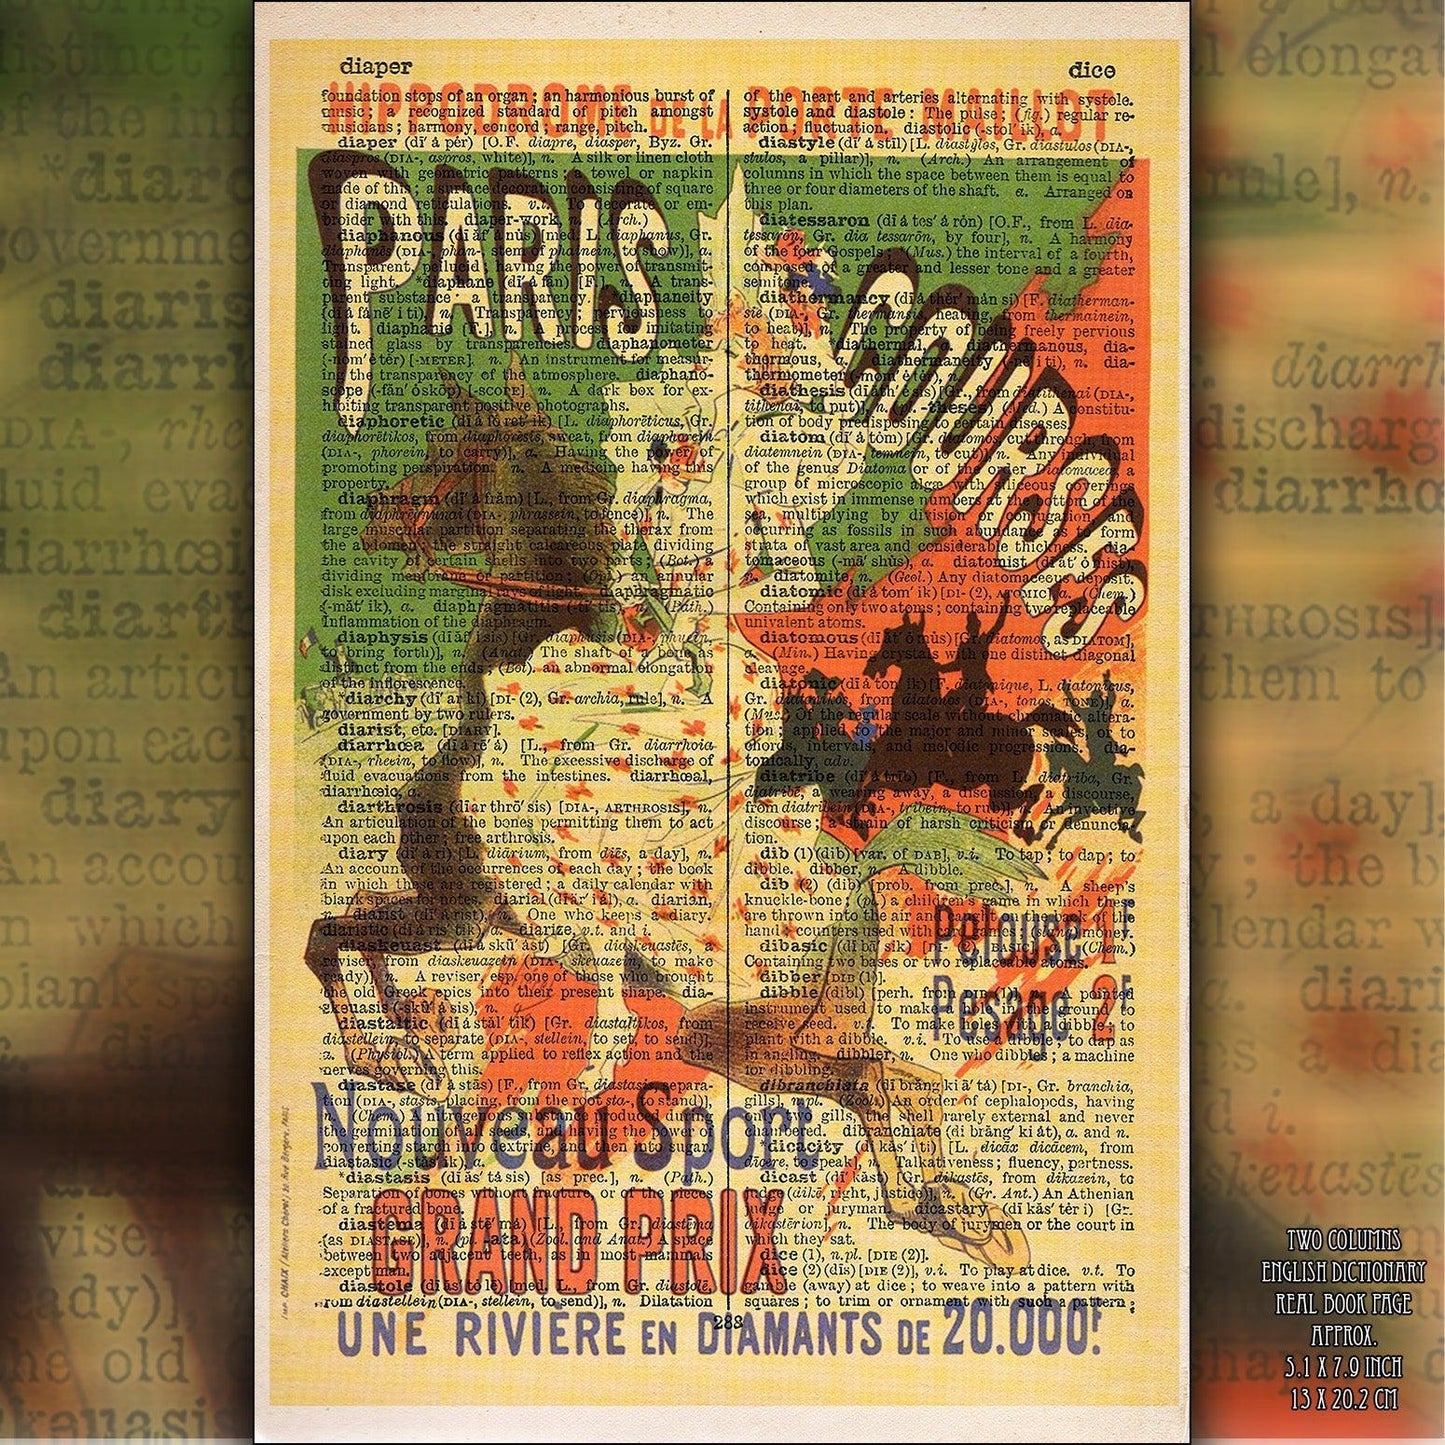 Give your home decor a touch of elegance through our exquisite Hippodrome de la Porte Maillot - Paris Courses reproduction poster. The artwork is a collage with a poster for Horses in art design by Jules Chéret (French graphic designer, 1836-1932). Year of created 1890.